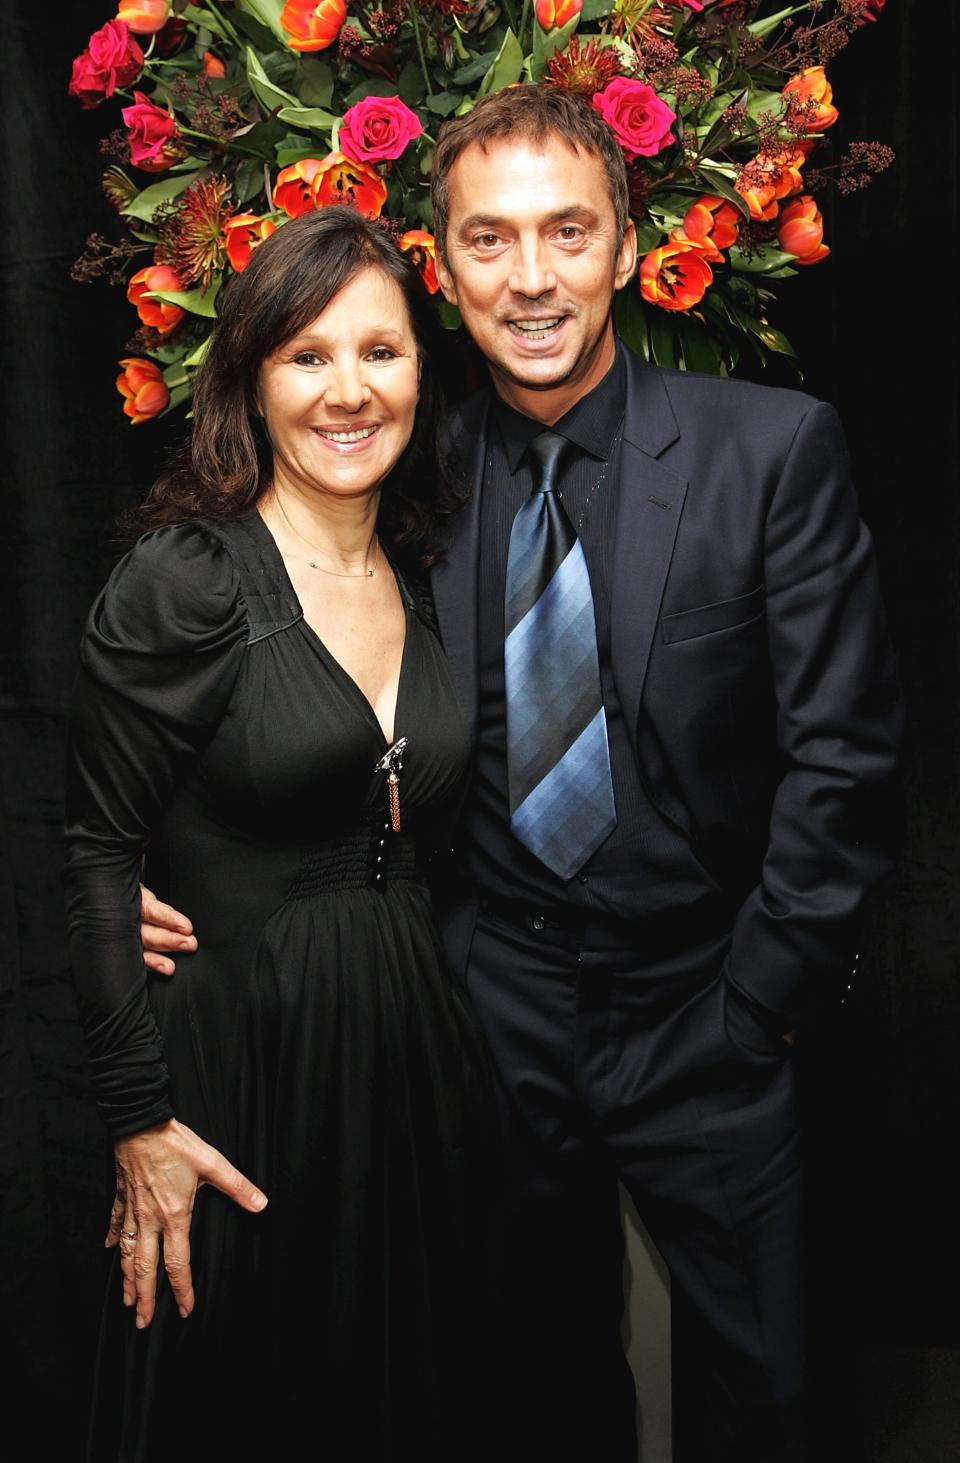 LONDON - JANUARY 21:  (UK TABLOID NEWSPAPERS OUT) 'Strictly Come Dancing' judges Bruno Tonioli and Arlene Phillips arrive at the after party following the UK premiere of 